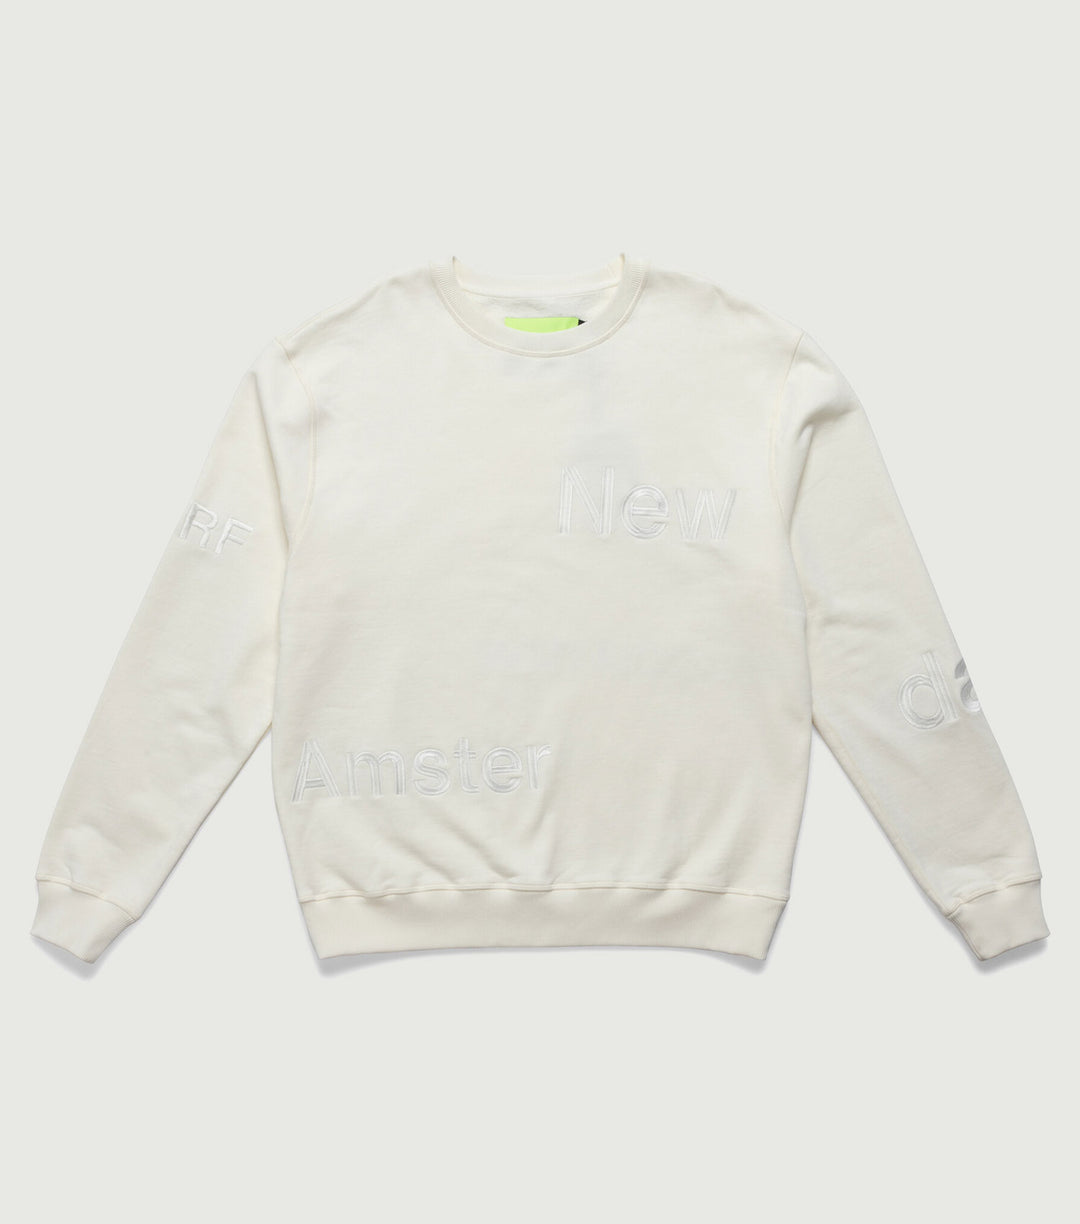 Name Sweat Off White - New Amsterdam Surf Association